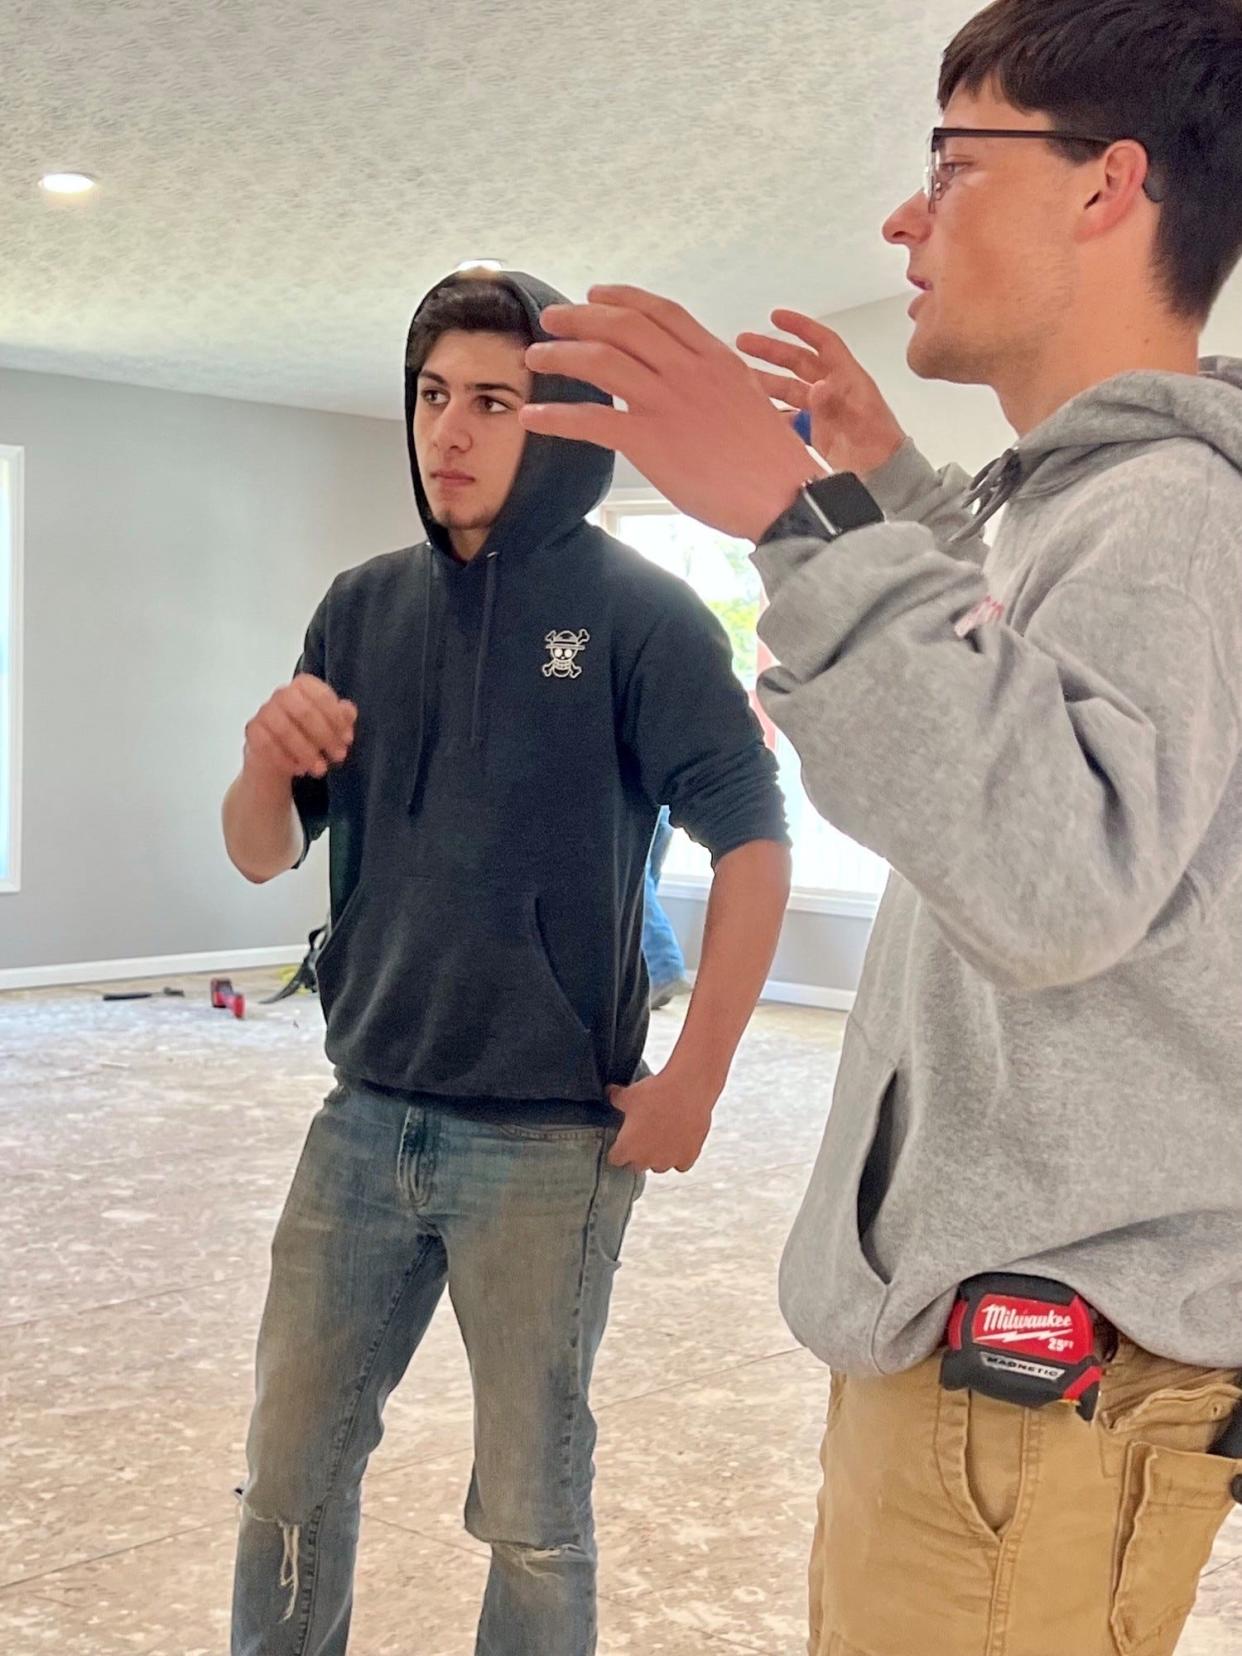 Copley High School student Mohamad Husein, left, and Norton High School student Braden Sullivan talk about the Wadsworth home they are working on in the Four Cities Compact carpentry program on April 29.